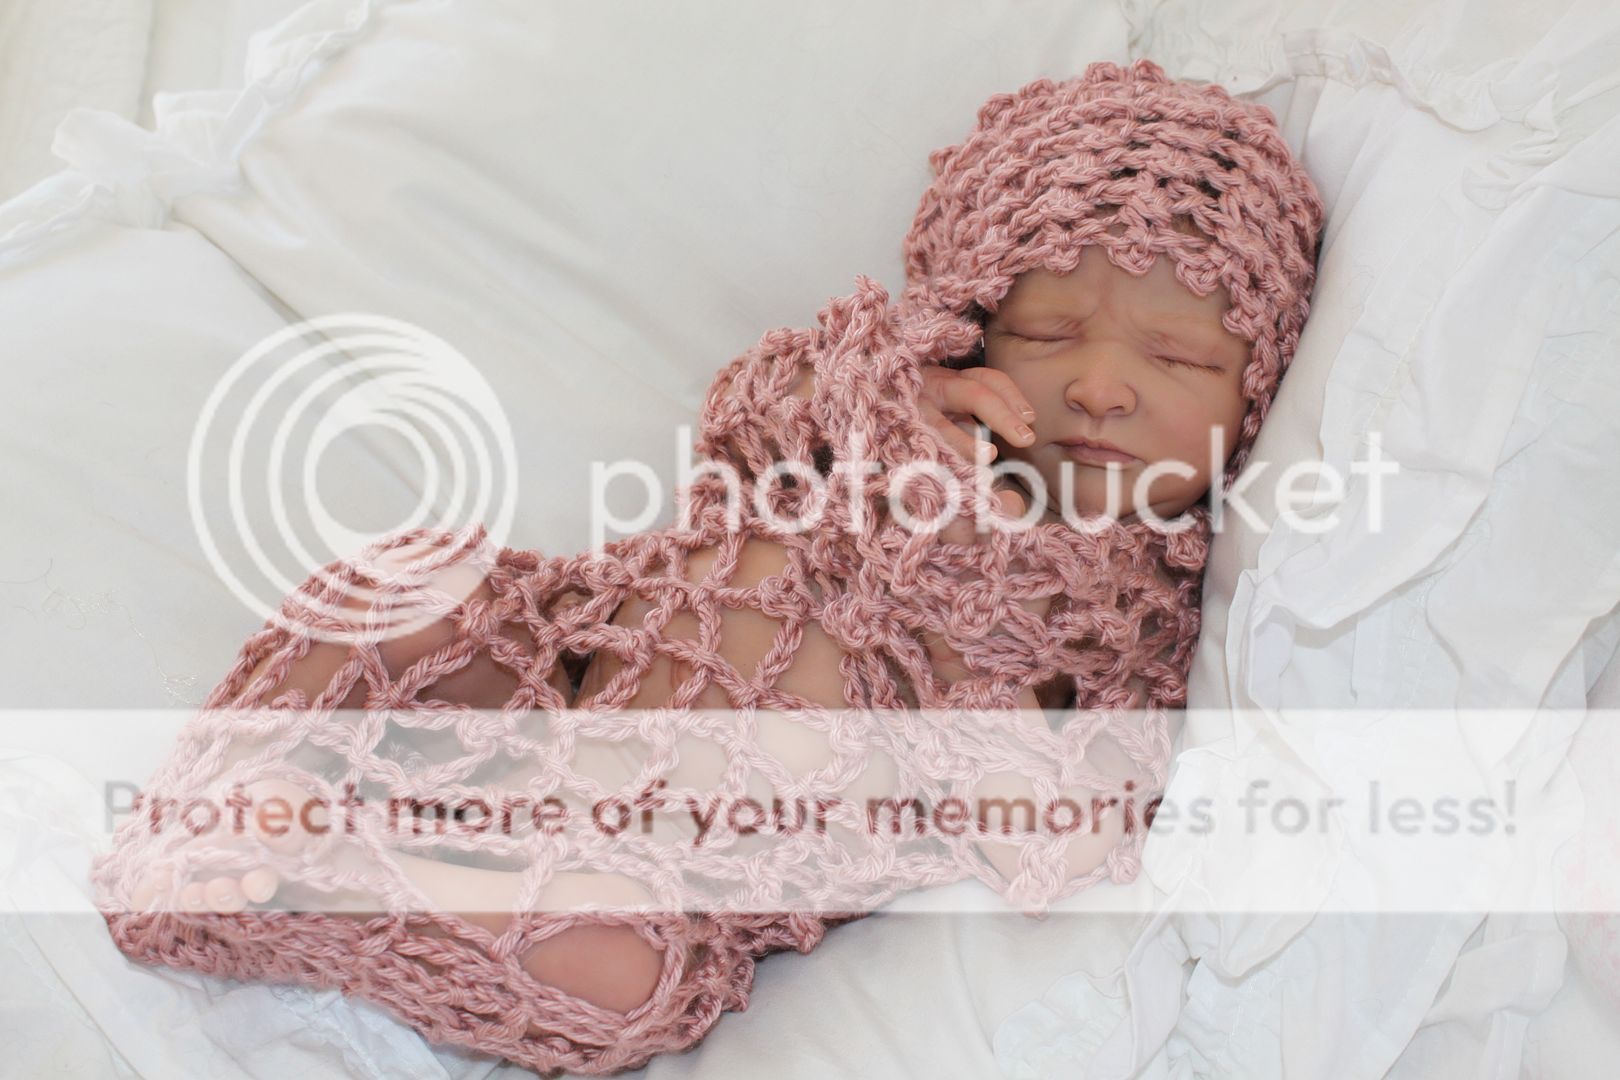 Enchanted Moments Nursery Reborn Baby Girl Noel Reese Kit by Andrea Arcello